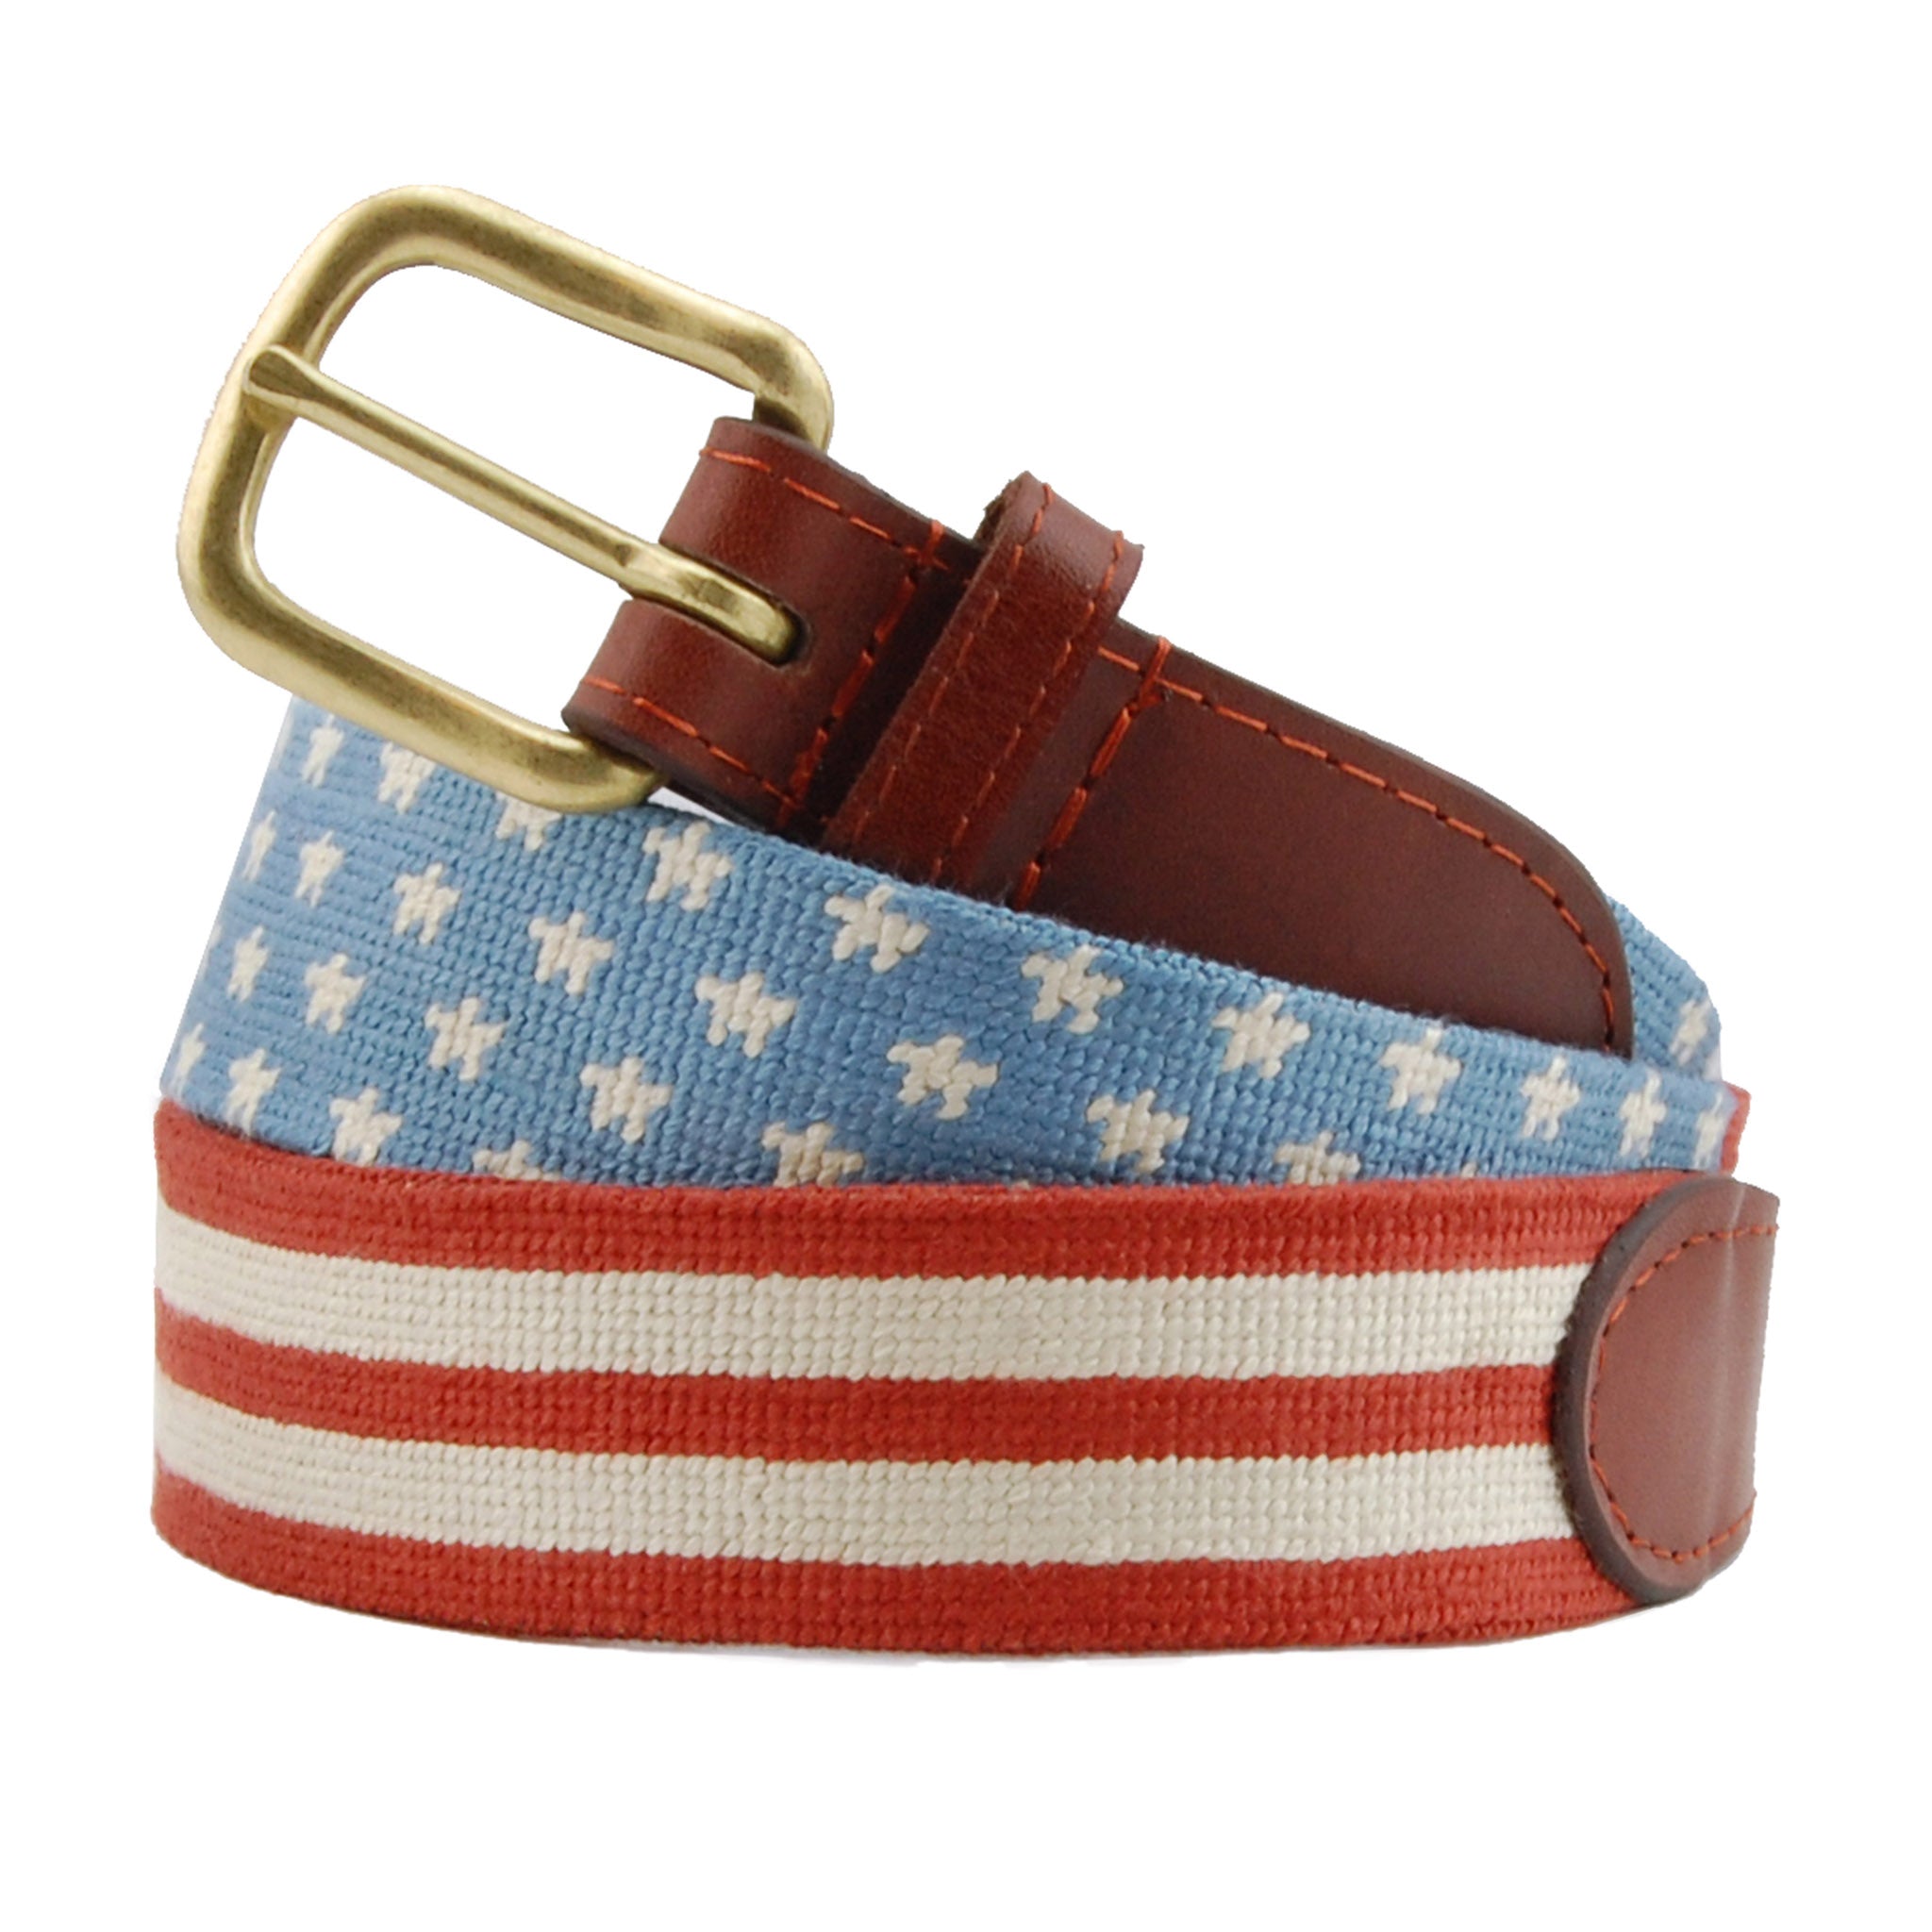 Smathers and Branson stars and stripes needlepoint belt